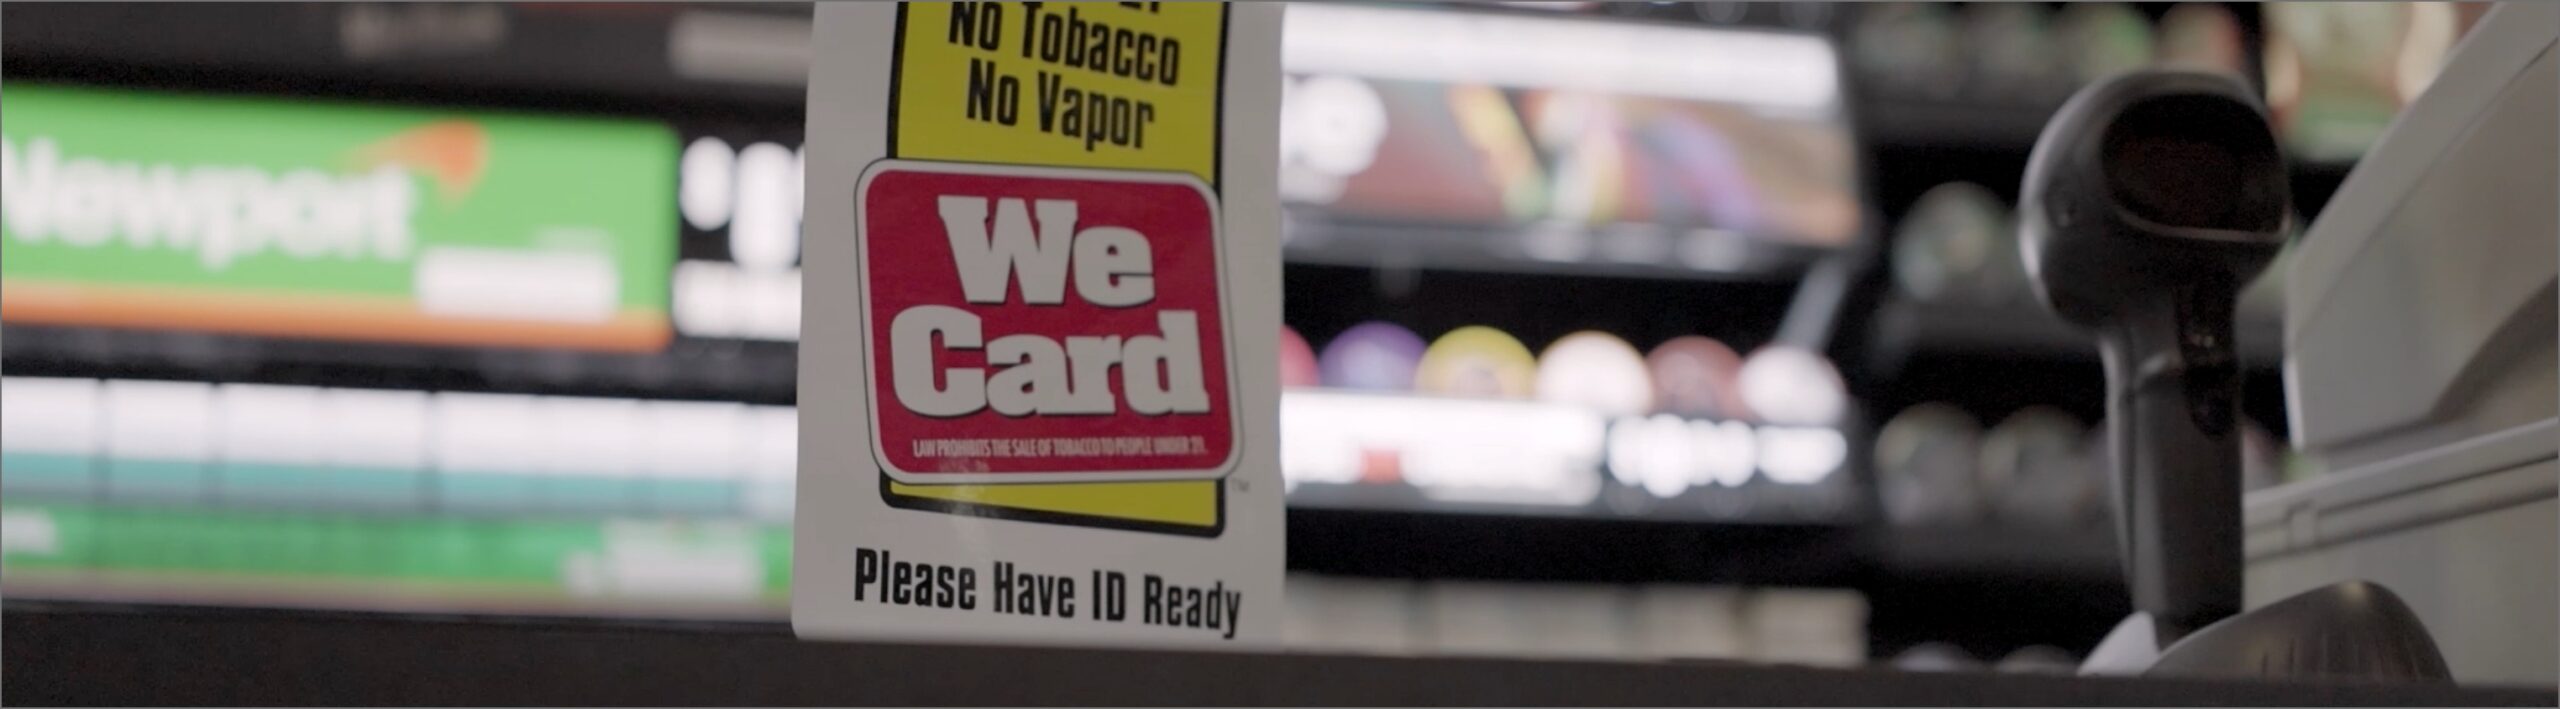 We Card logo sign in the window of a store, representing youth tobacco and nicotine youth access prevention.